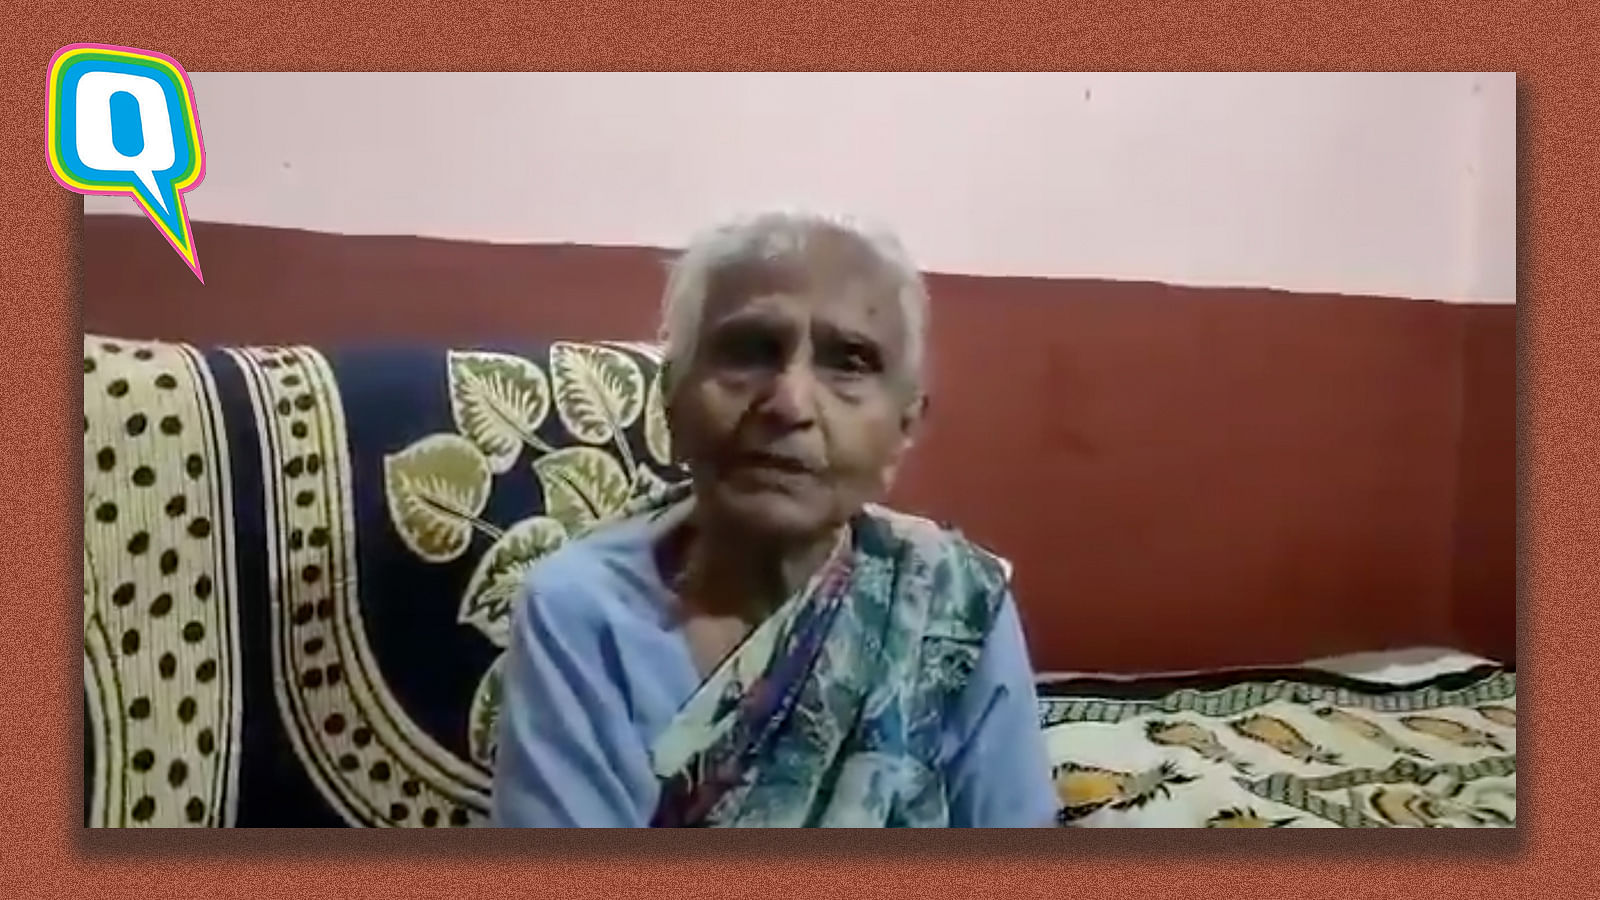 Salbha Uskar, 82 year old woman from Madhya Pradesh’s offered Rs 1 lakh as donation to fight COVID-19